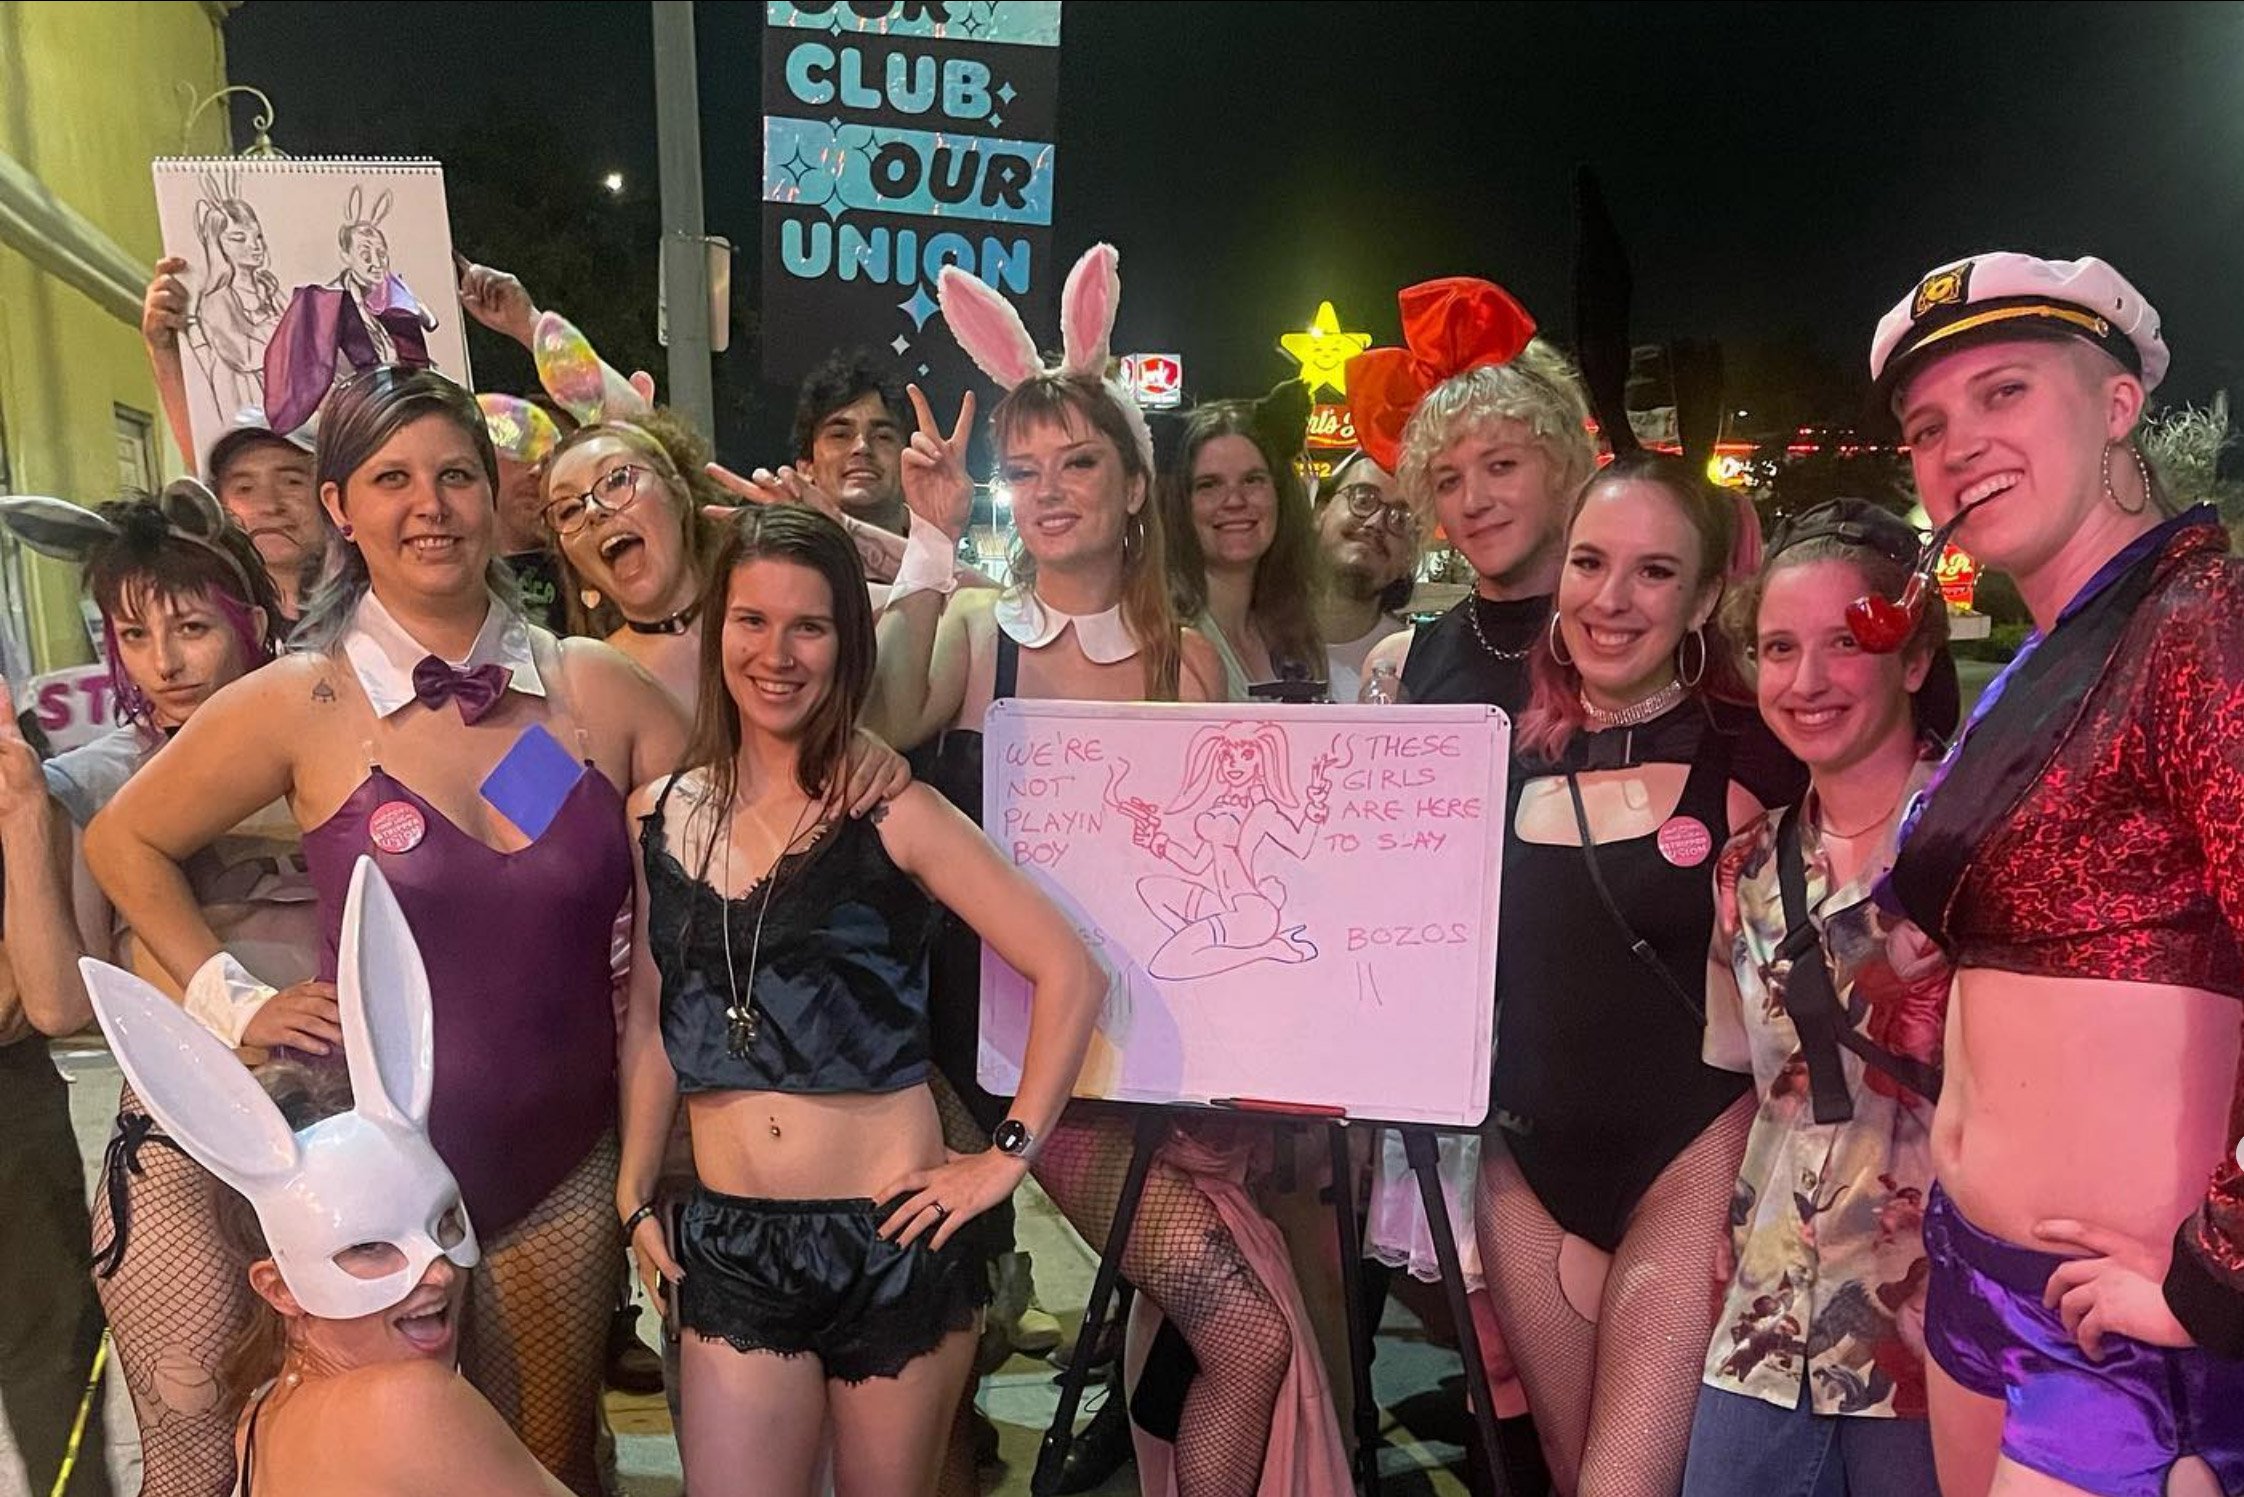 Strip Club Dancers Plan to Hold Union Elections as Unionization Wave Spreads Truthout